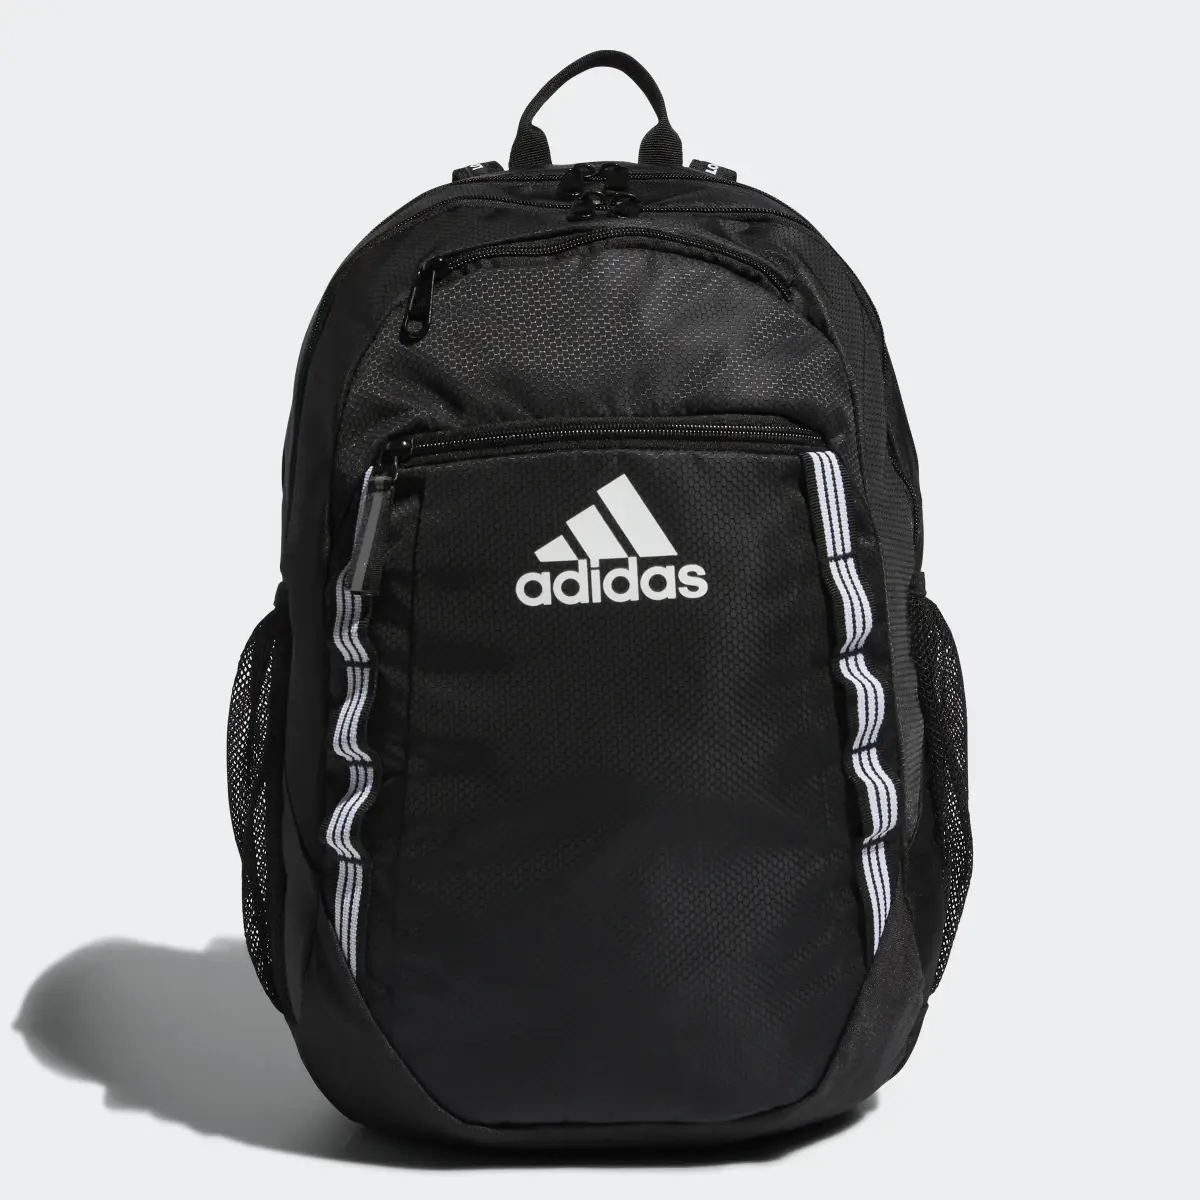 Adidas Excel Backpack. 1